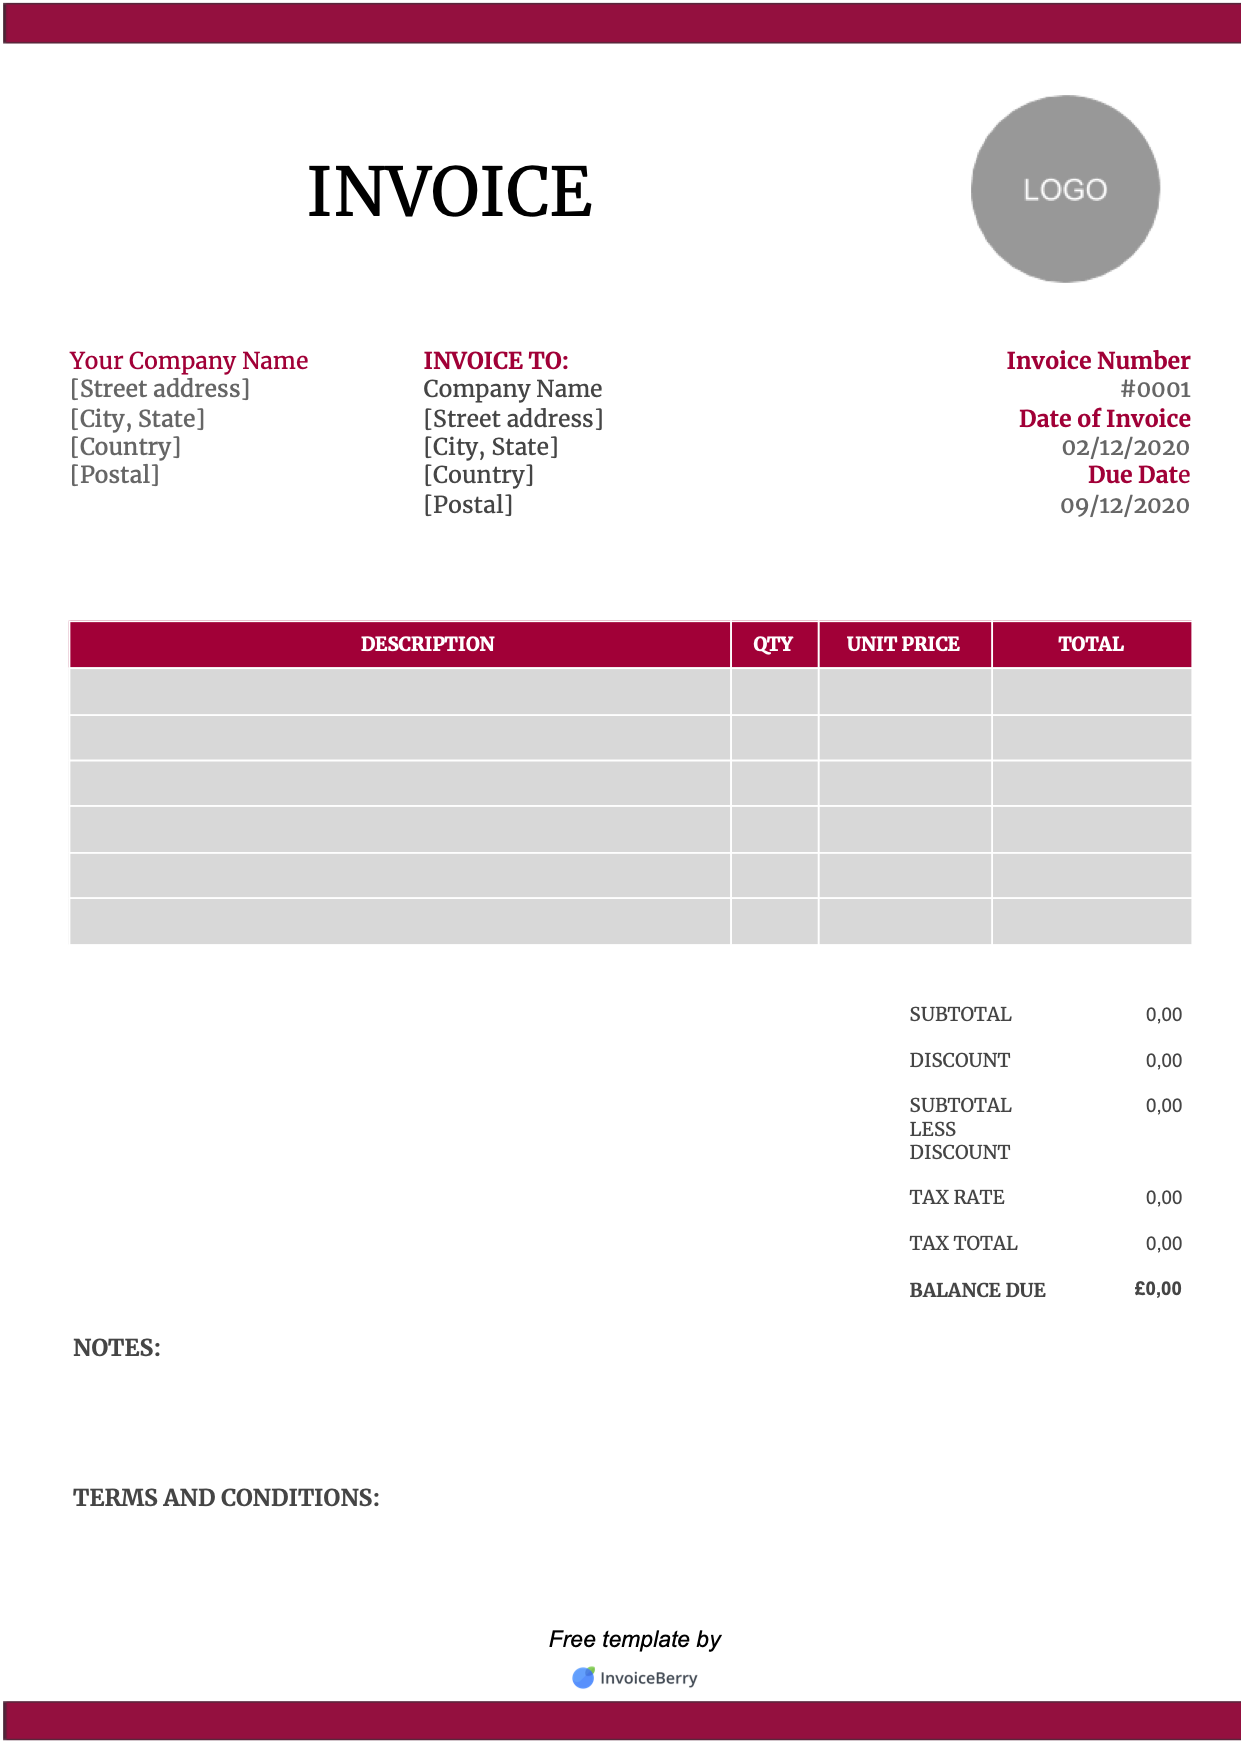 Free Invoice Templates Download All Formats And Industries Invoiceberry